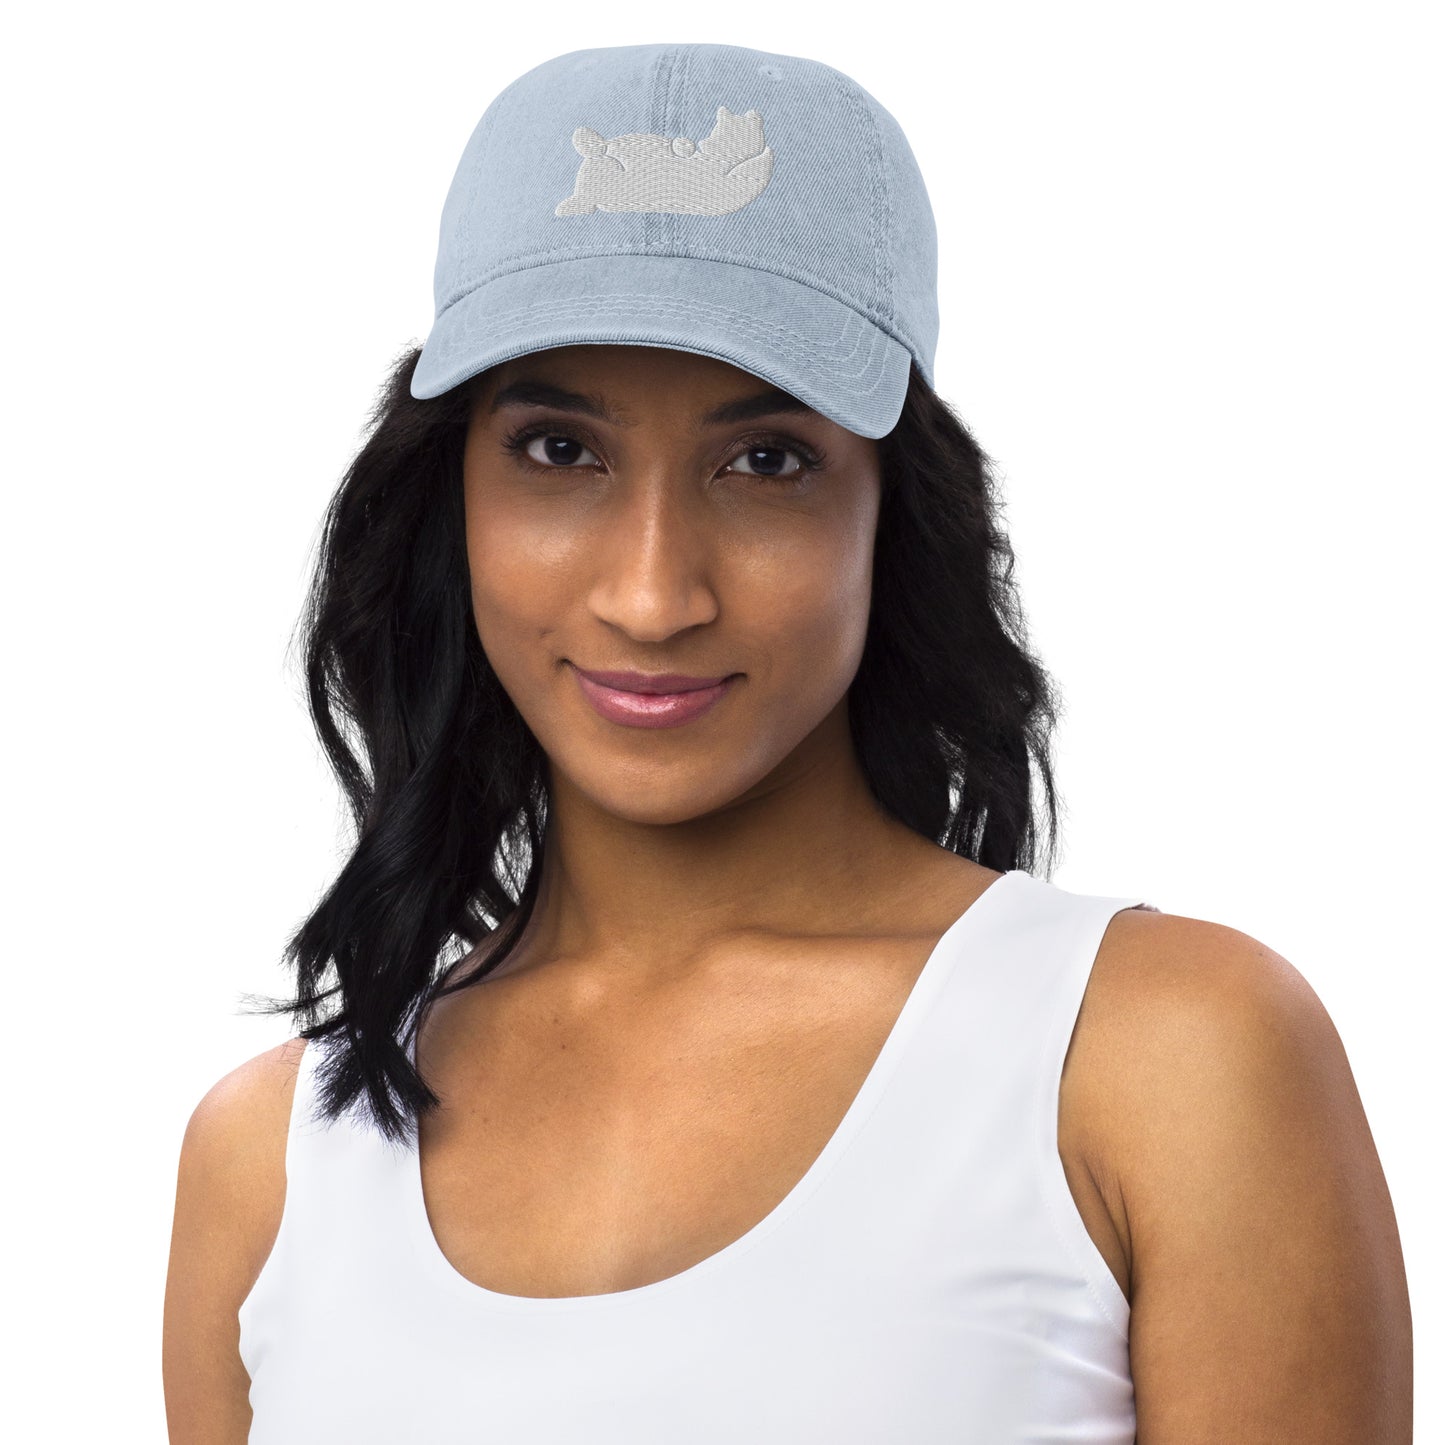 Lazy Bear Outfitters' Branded Denim Hat